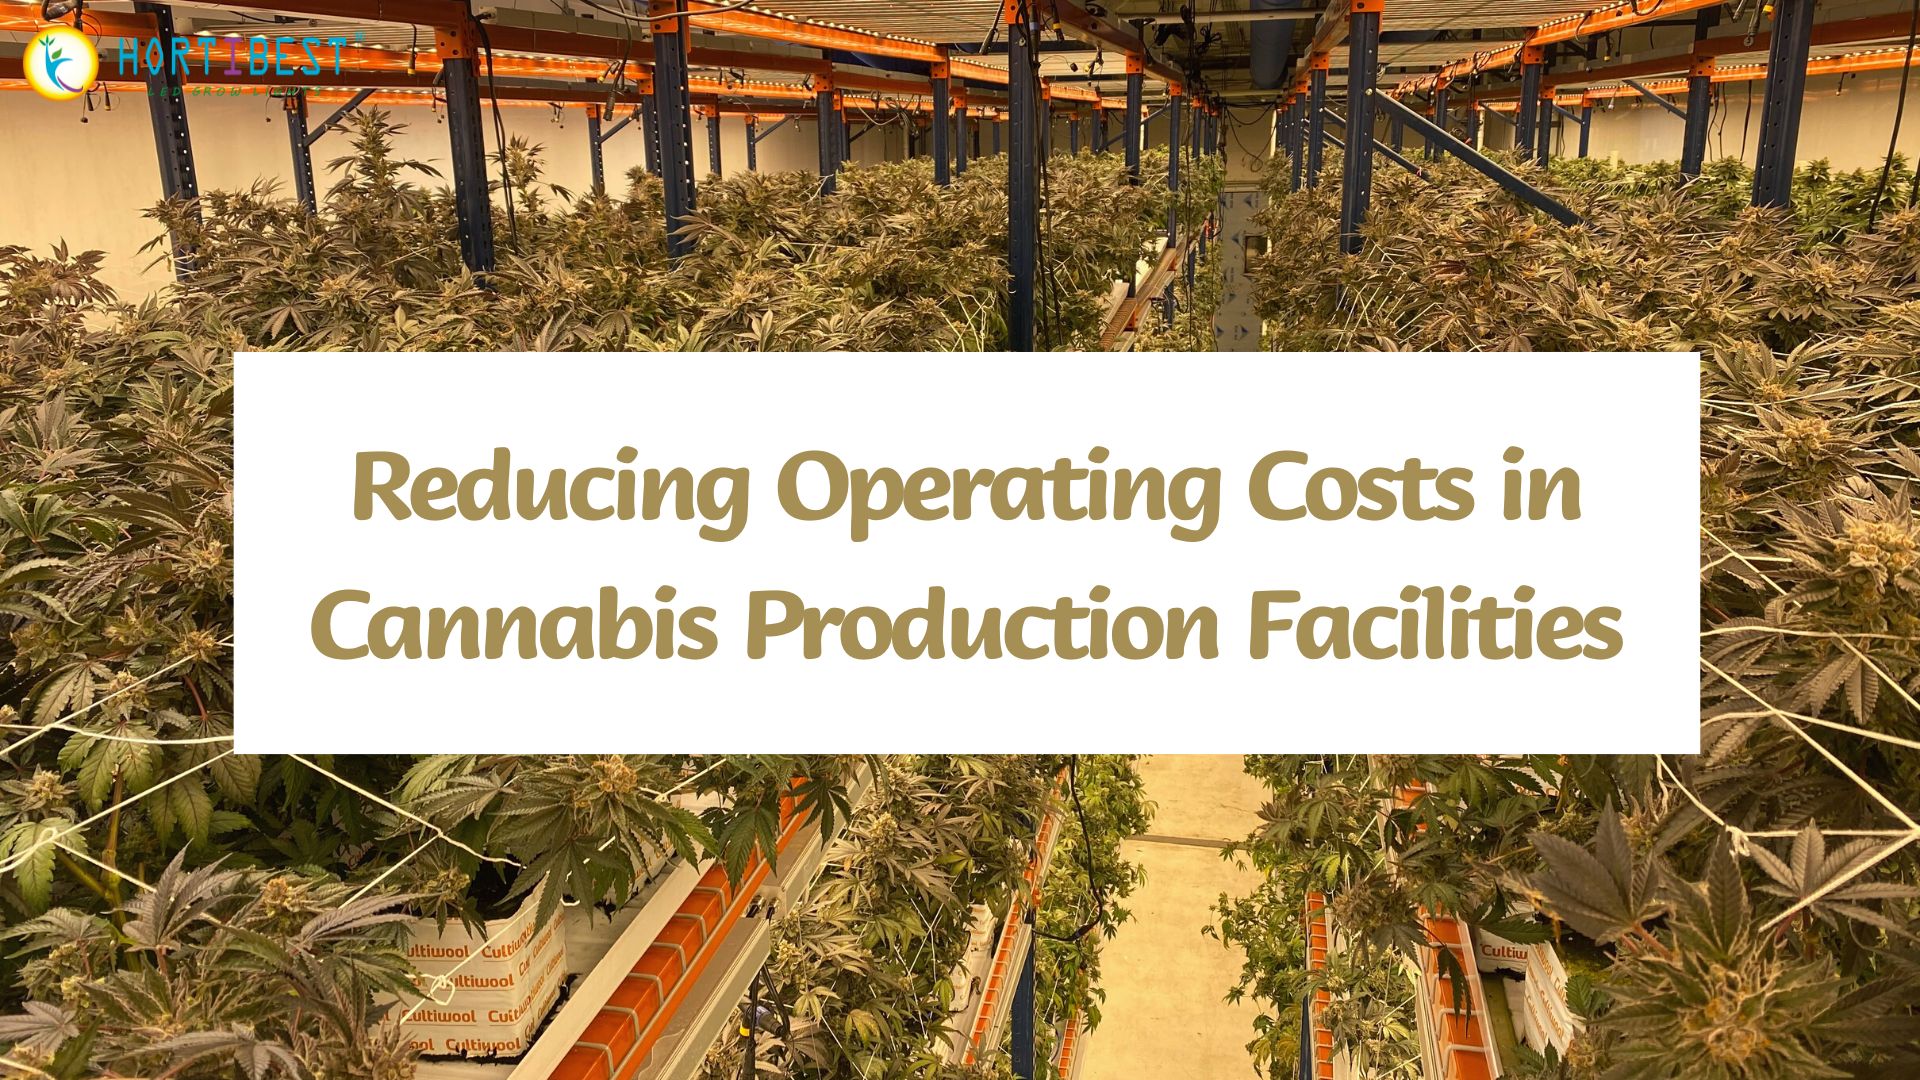 Reducing Operating Costs in Cannabis Production Facilities